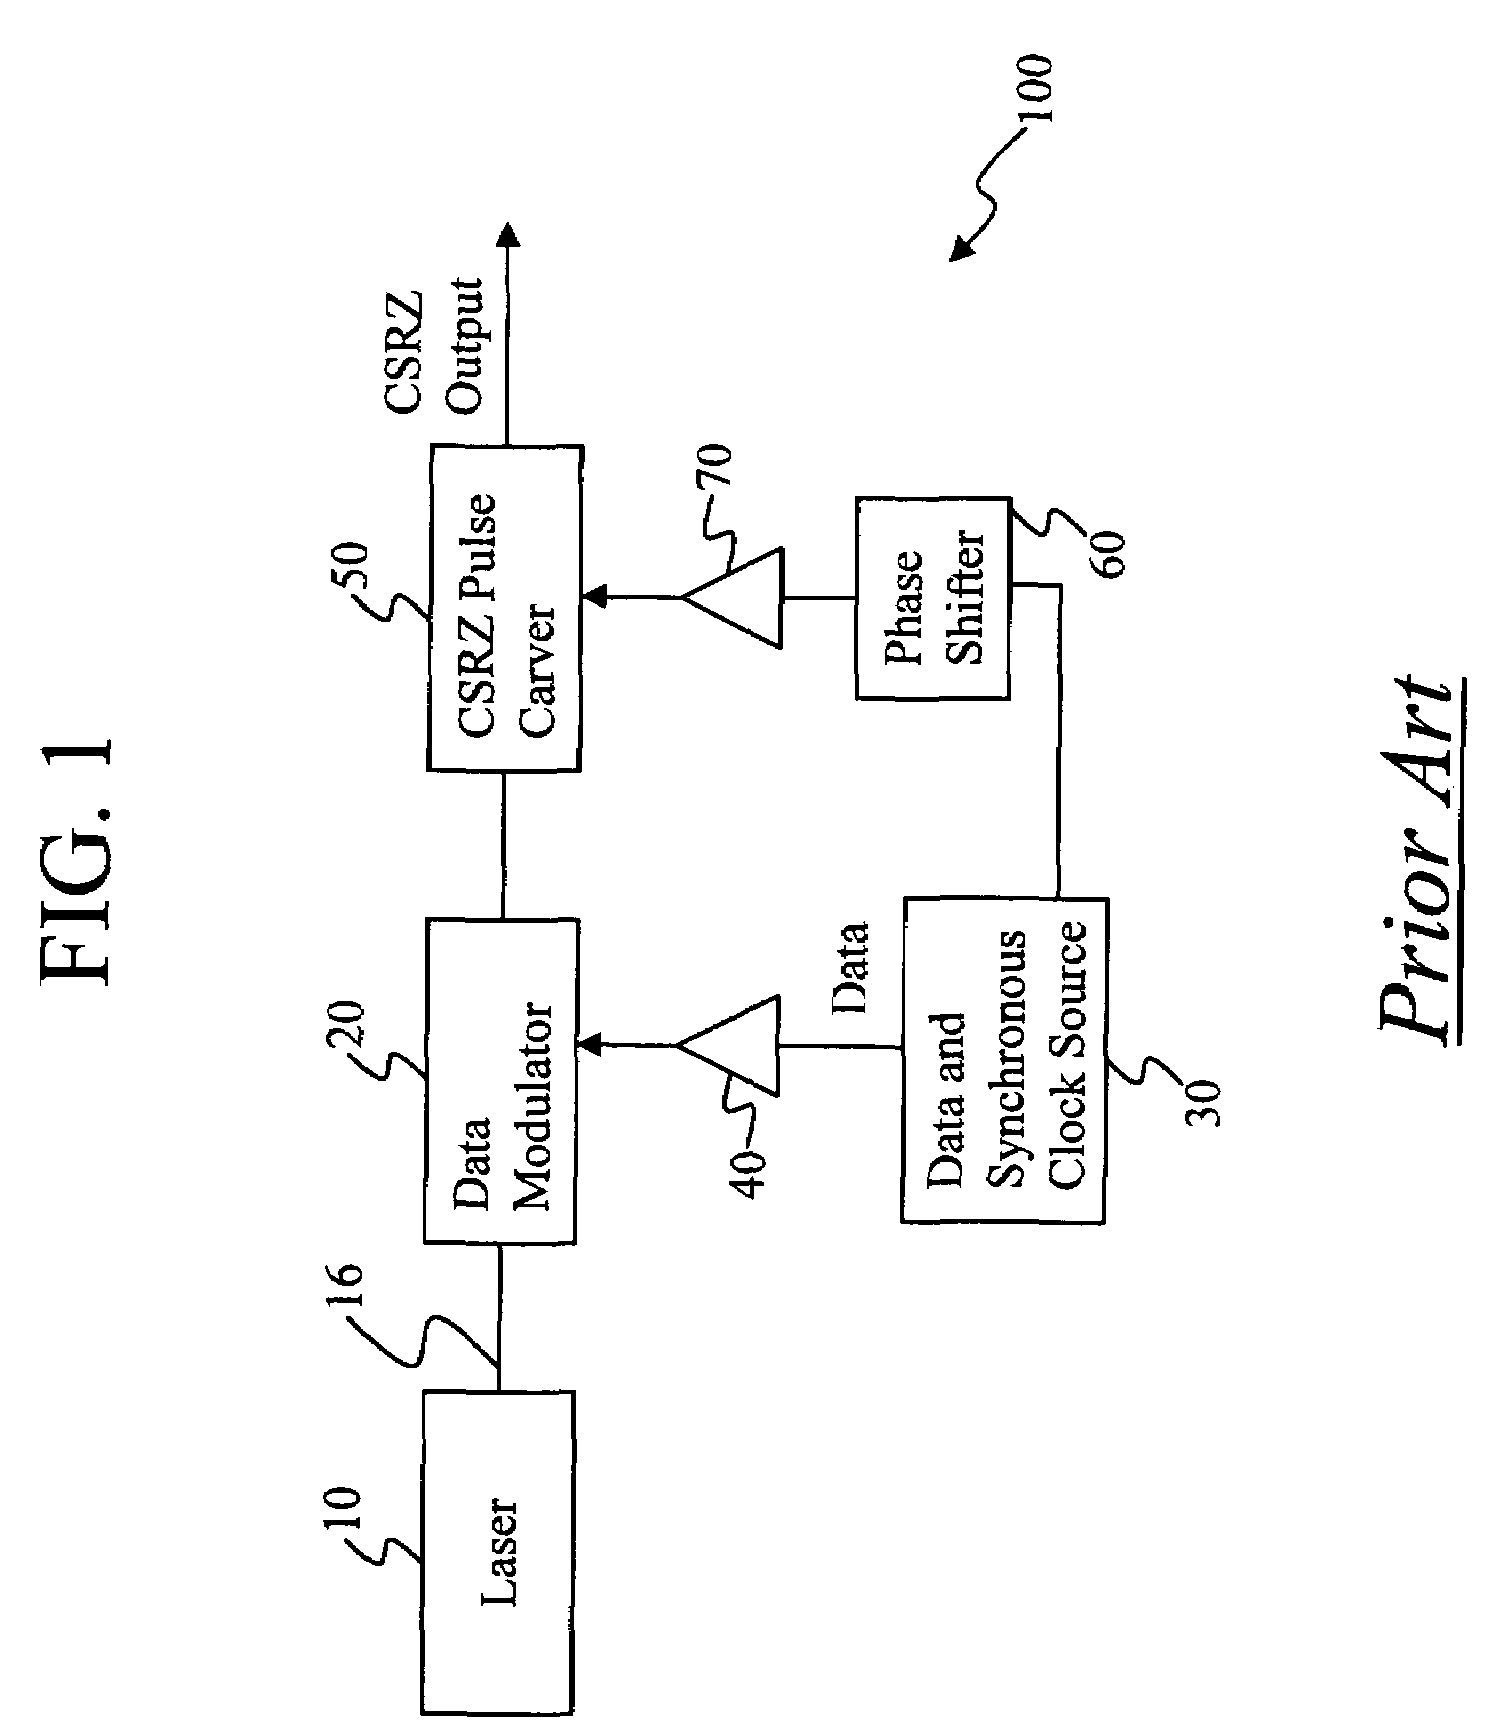 Method and apparatus for controlling modulator phase alignment in a transmitter of an optical communications system